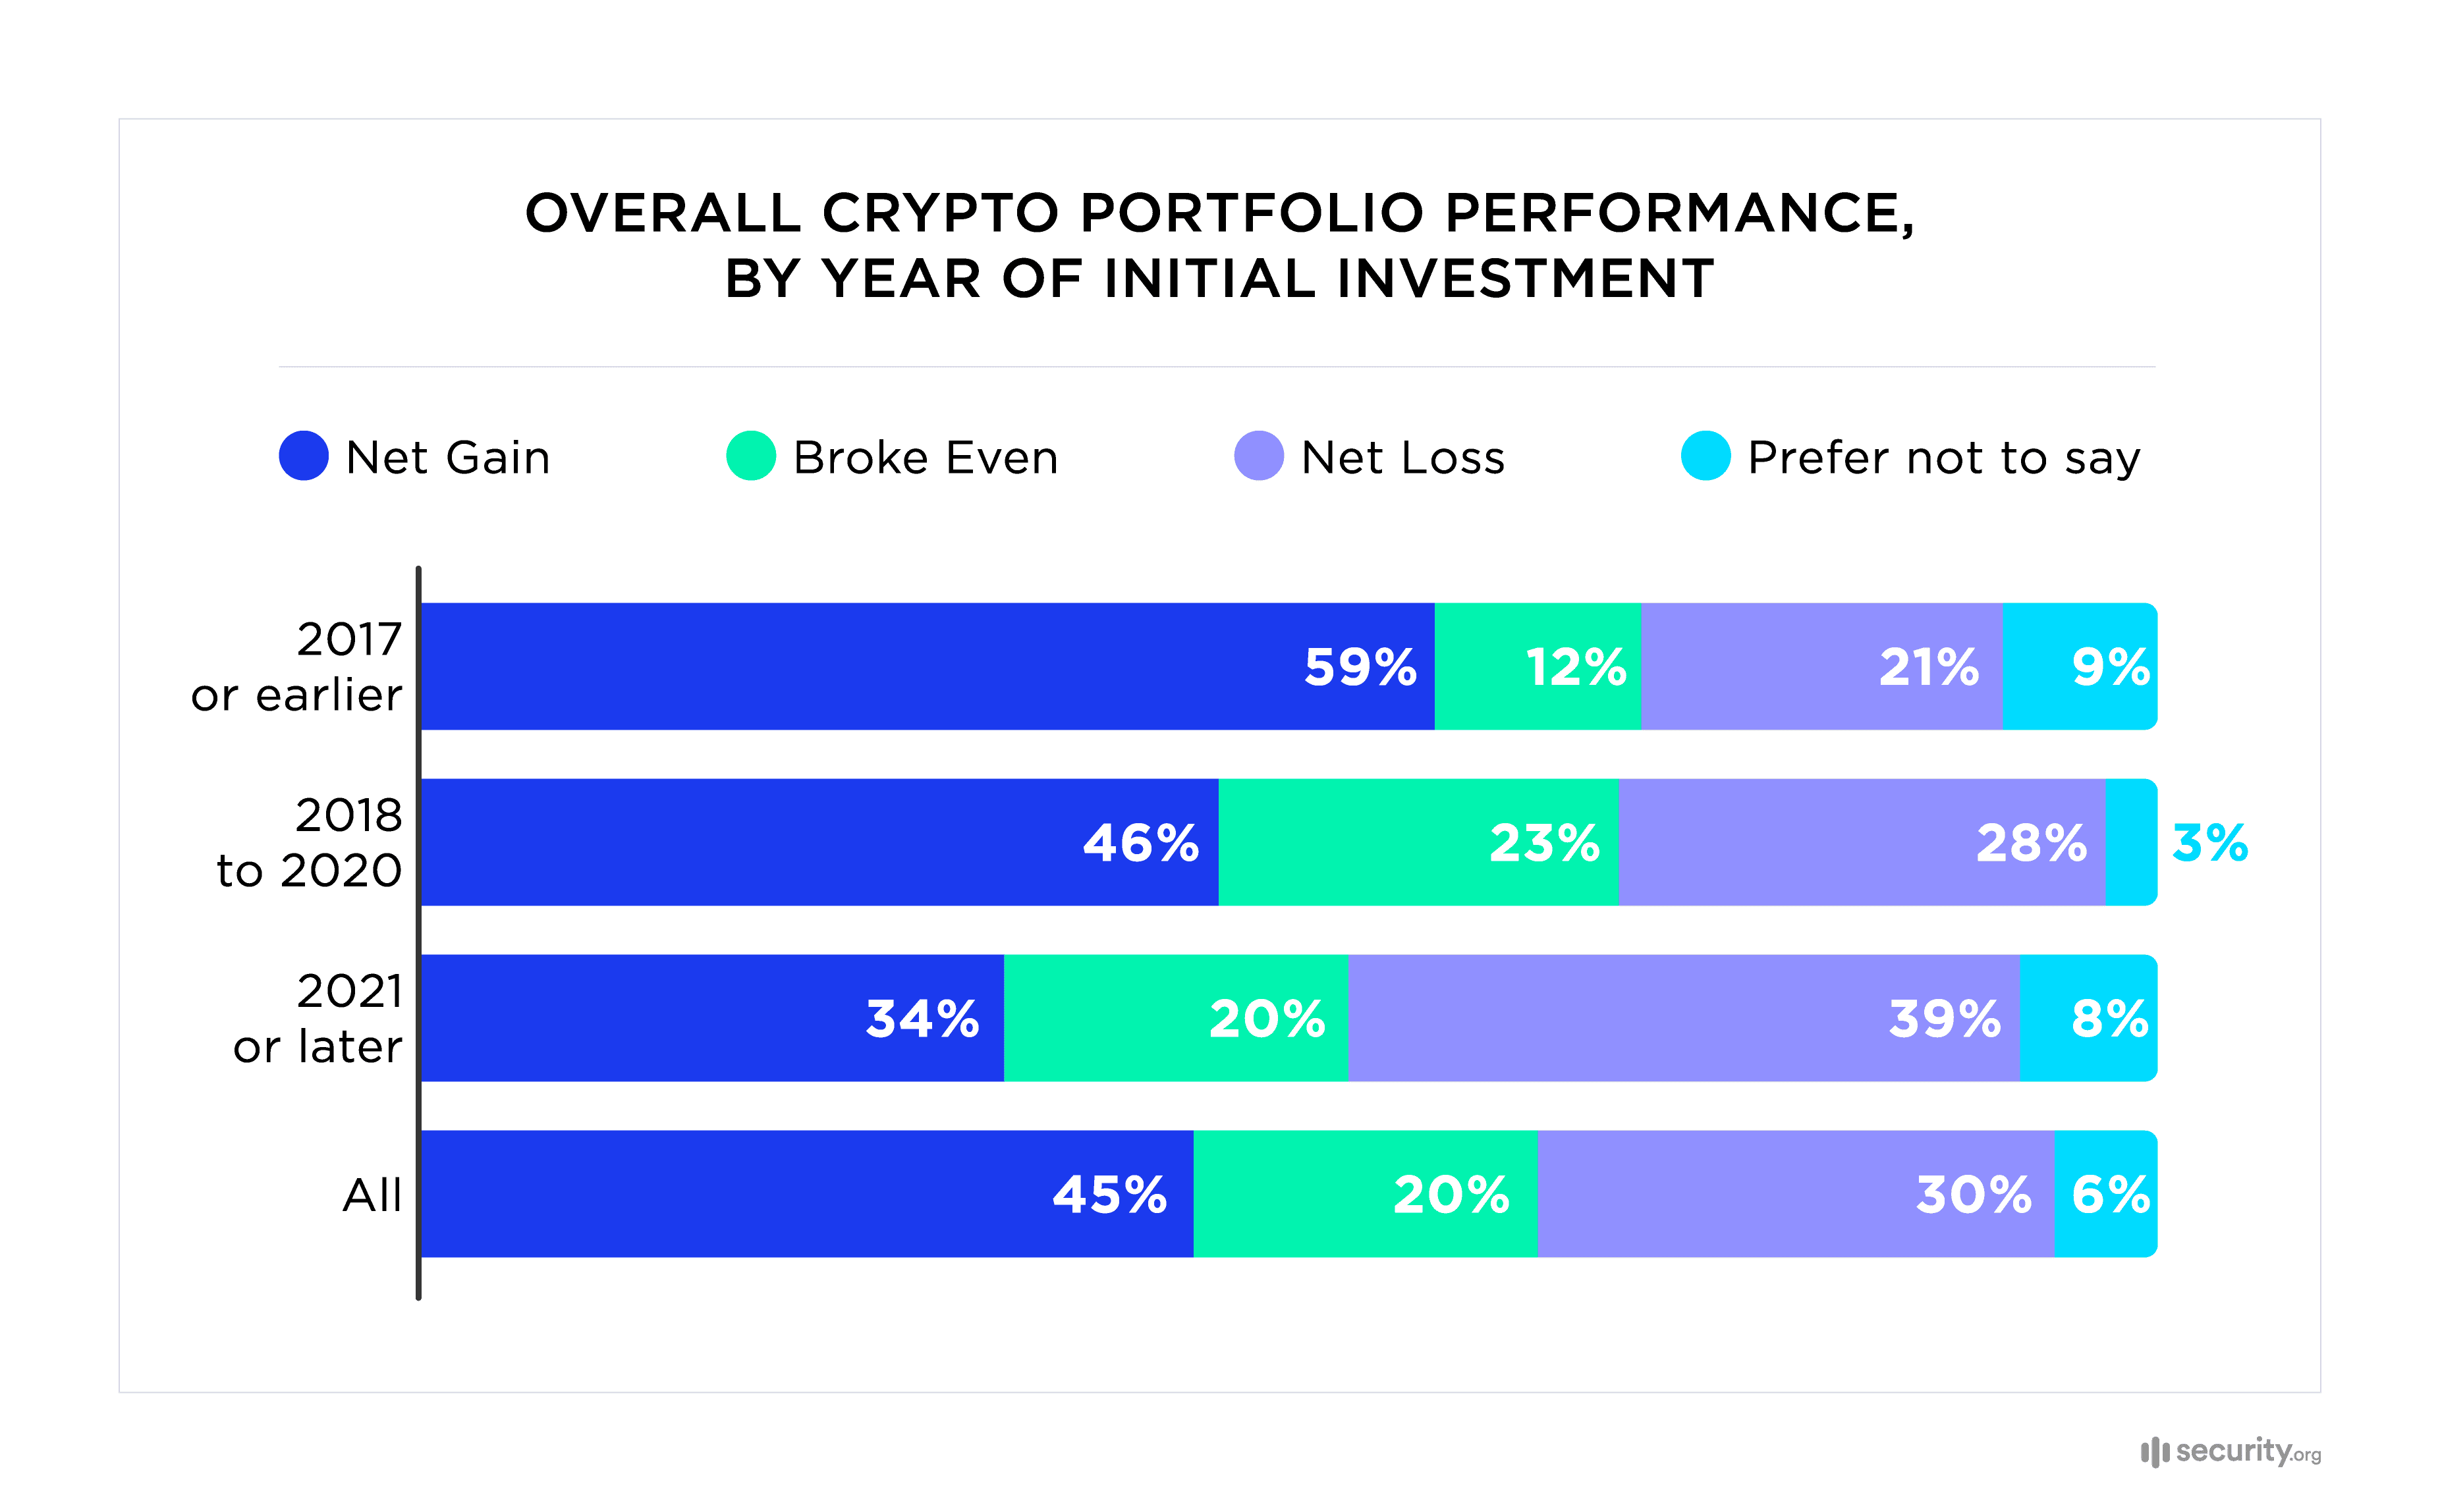 Overall Crypto Portfolio Performance By Year of Initial Investment